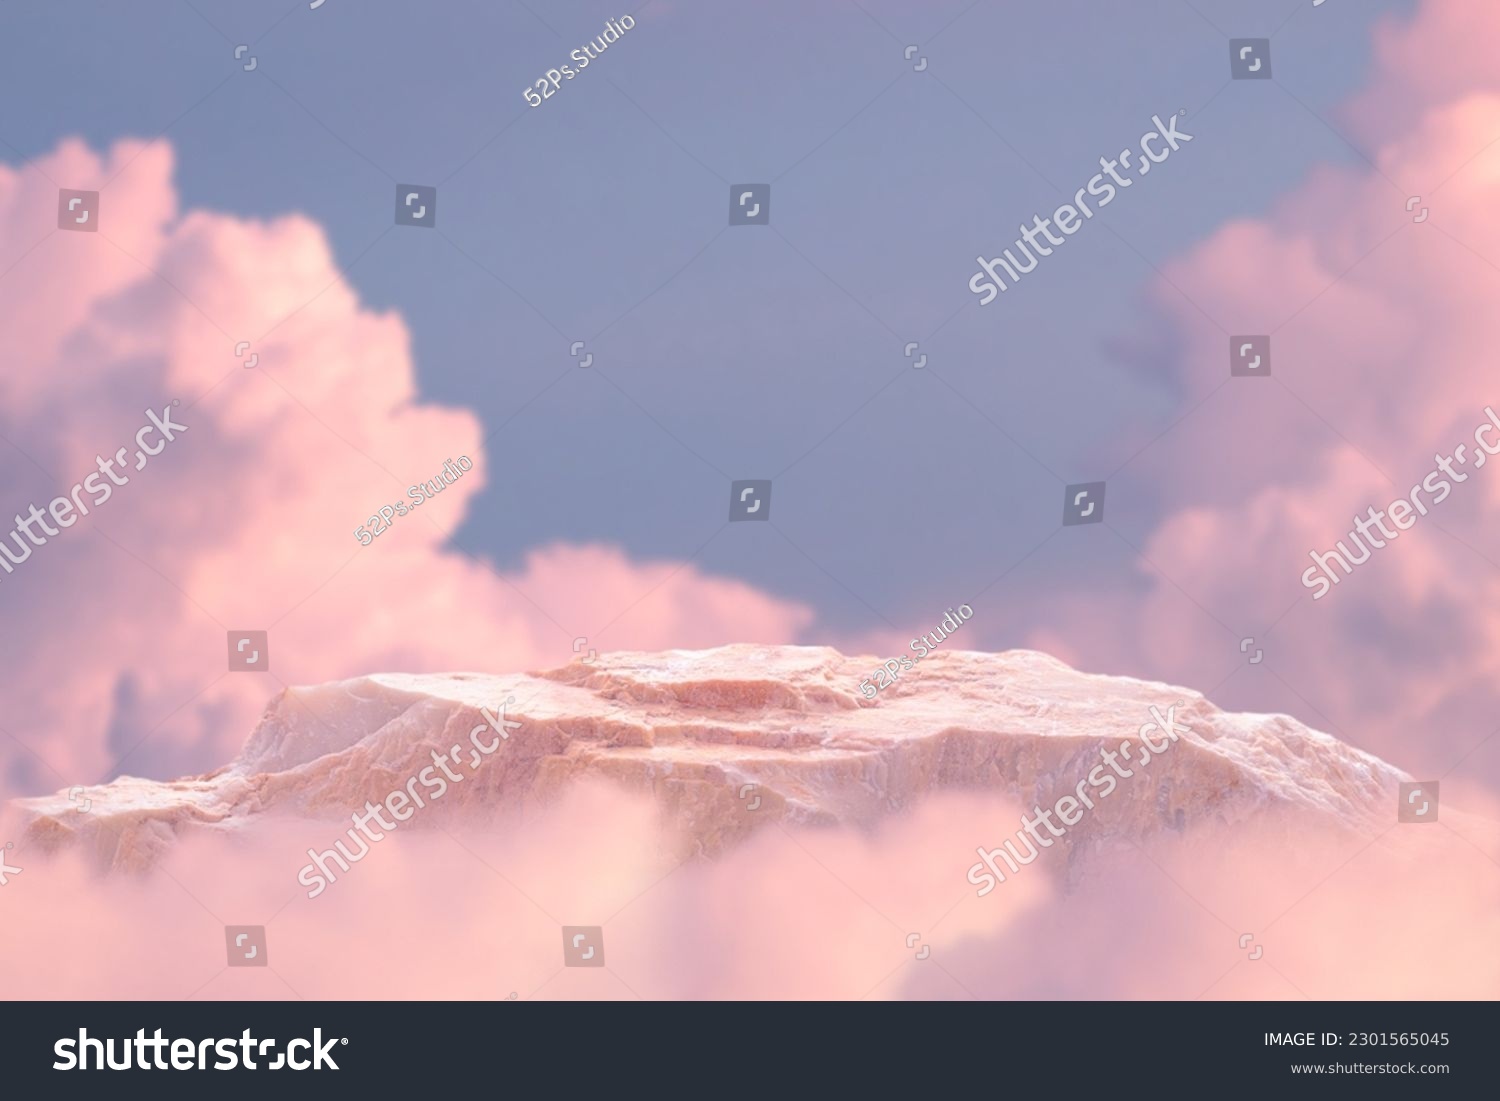 Stone podium tabletop floor in outdoor on sky pink gold pastel soft cloud blurred background.Beauty cosmetic product placement pedestal present promotion stand display,summer paradise dreamy concept. #2301565045